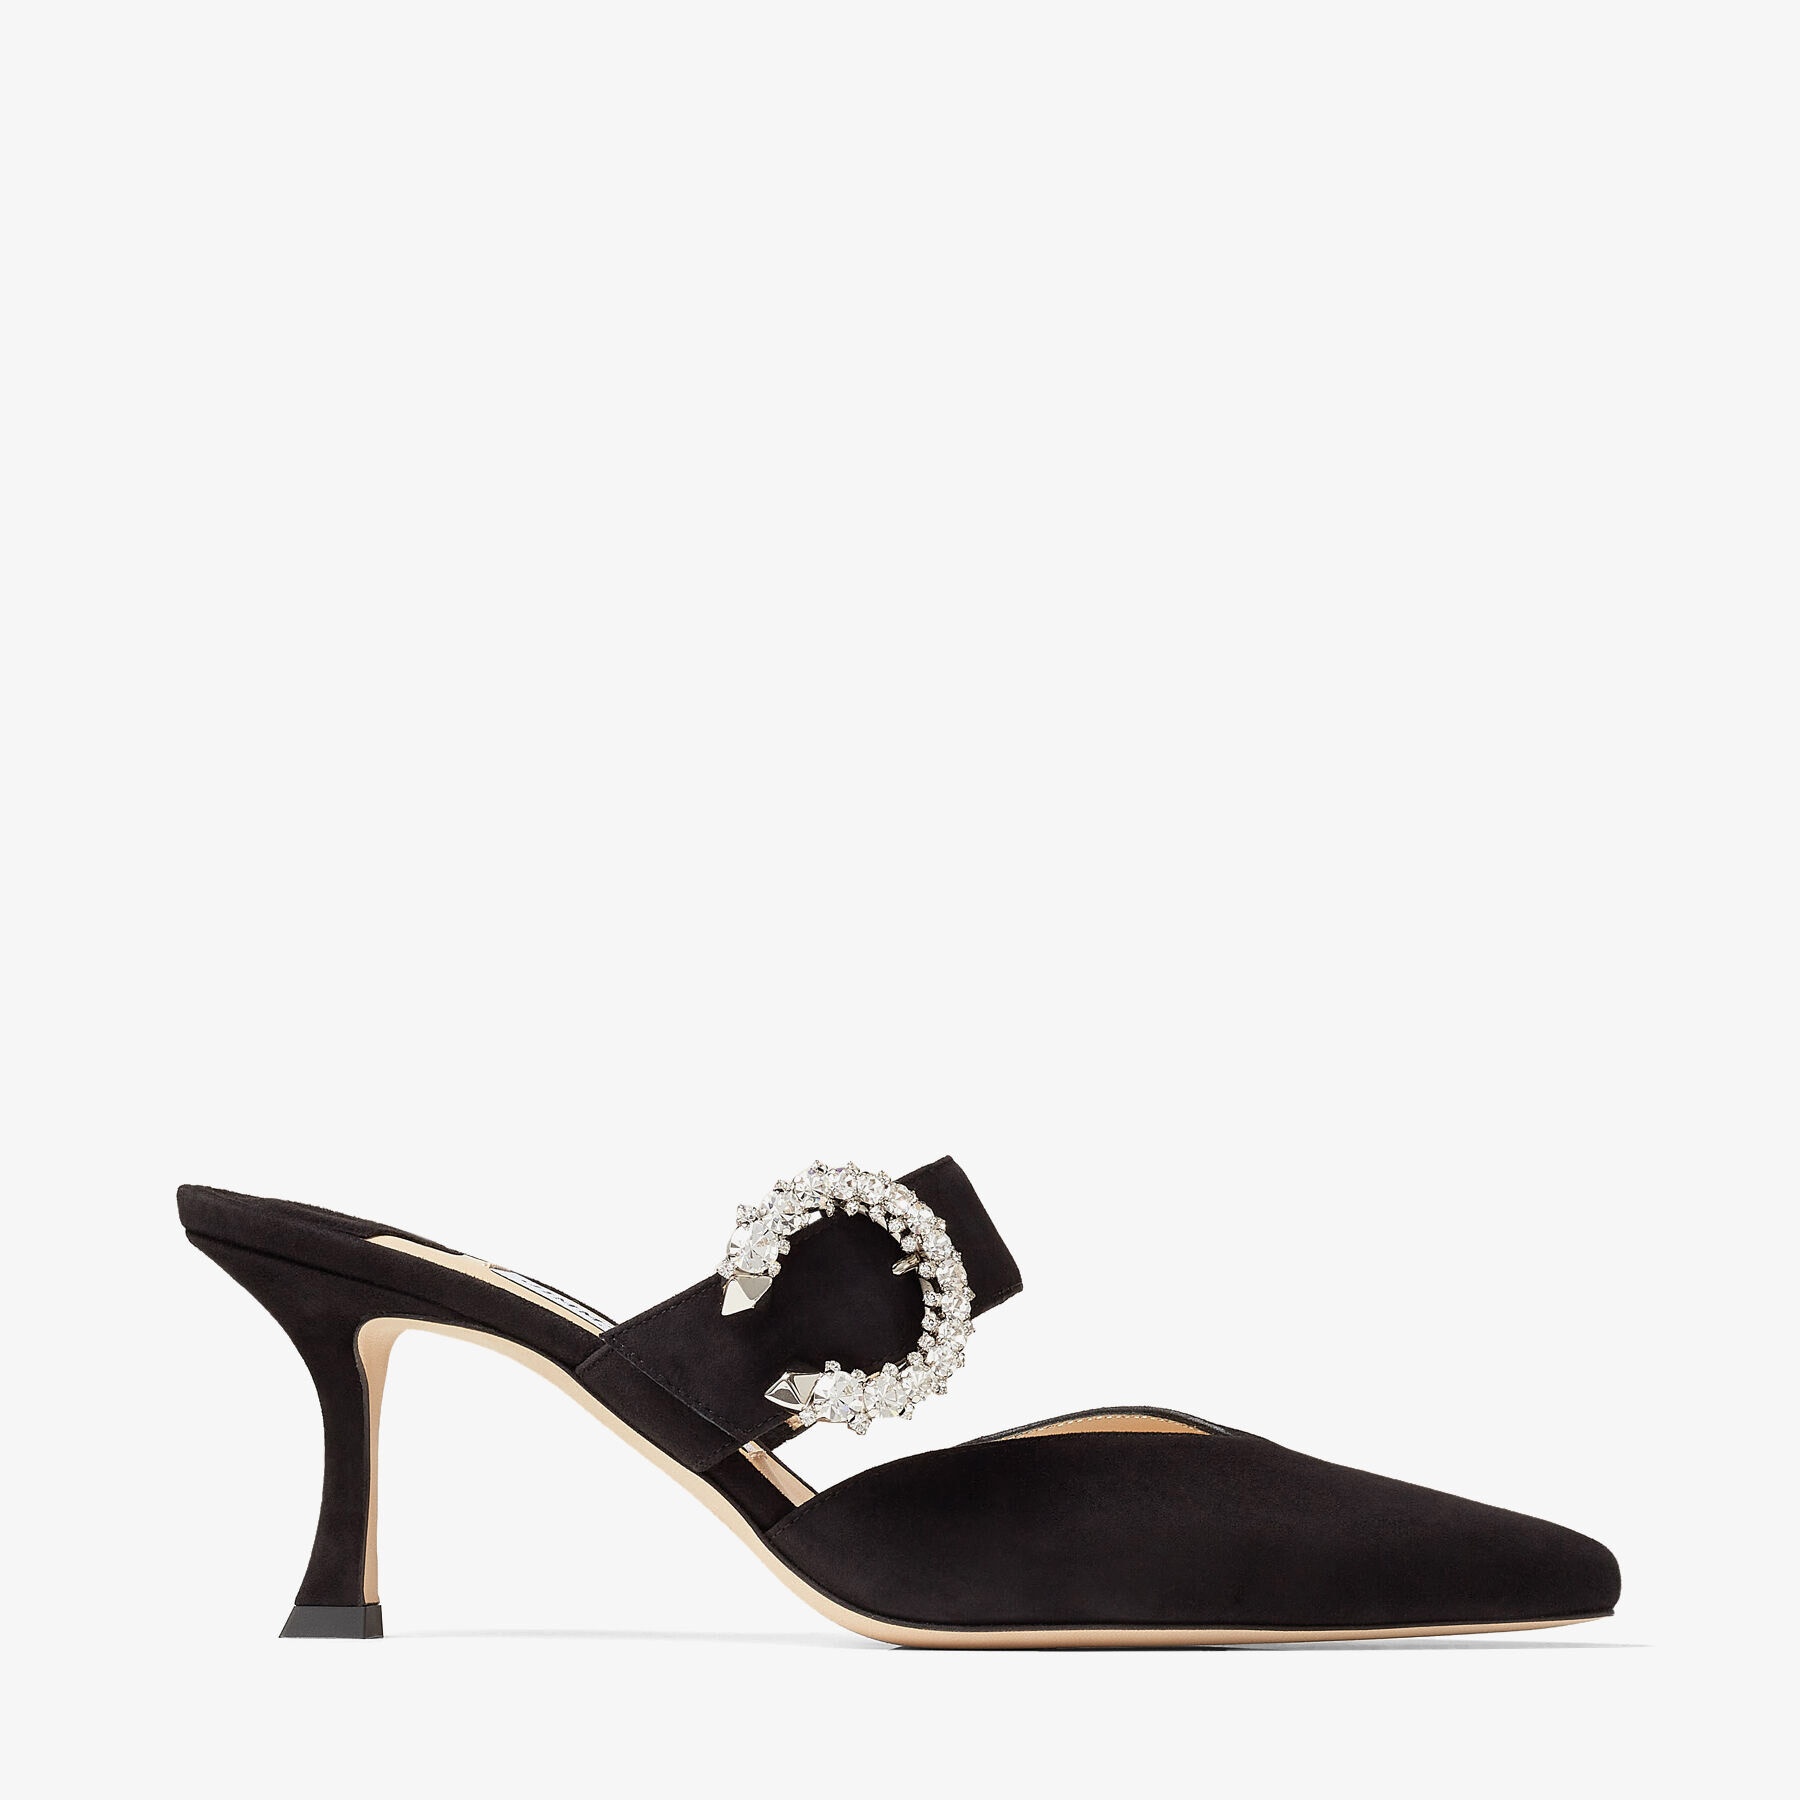 Marta 70
Black Suede Mules with Crystal Buckle - 1